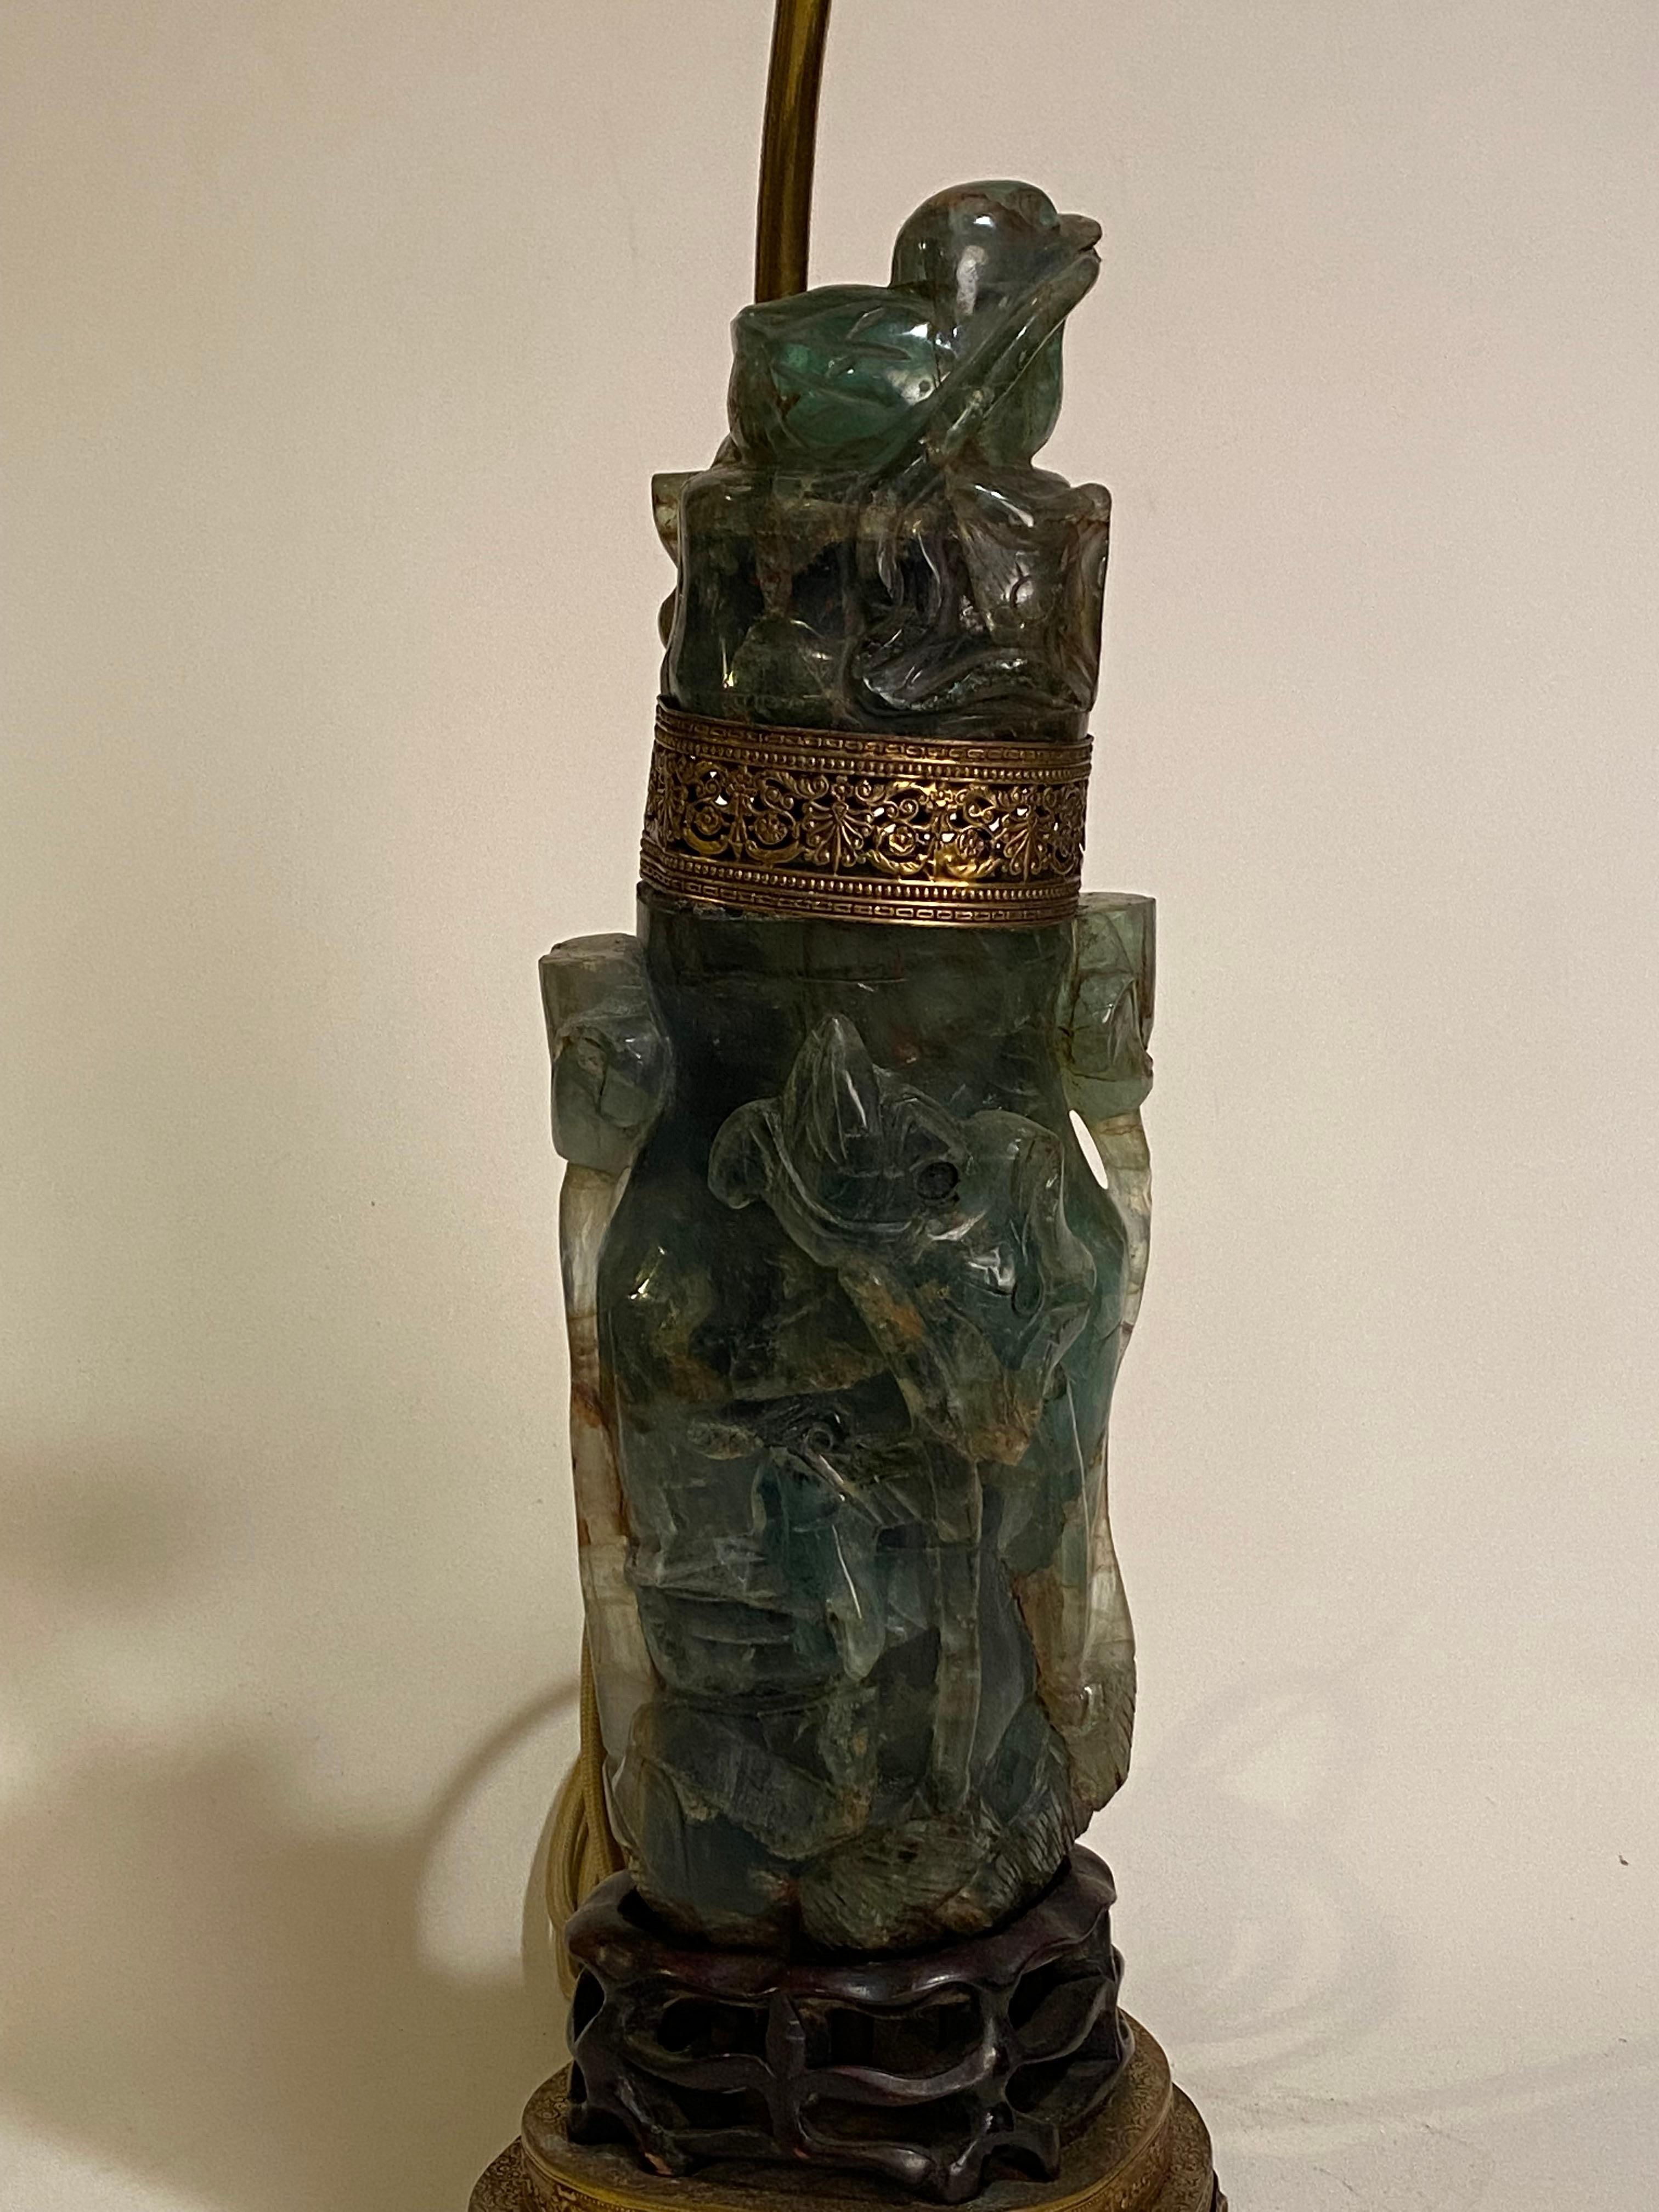 Asian carved jade/nephrite bird table lamp. Circa 1920. The interior portion lights up separately from the top two lights. Pierced carved Rosewood base ending with a brass filigree footed base. A distinct and special lamp. Good overall condition.